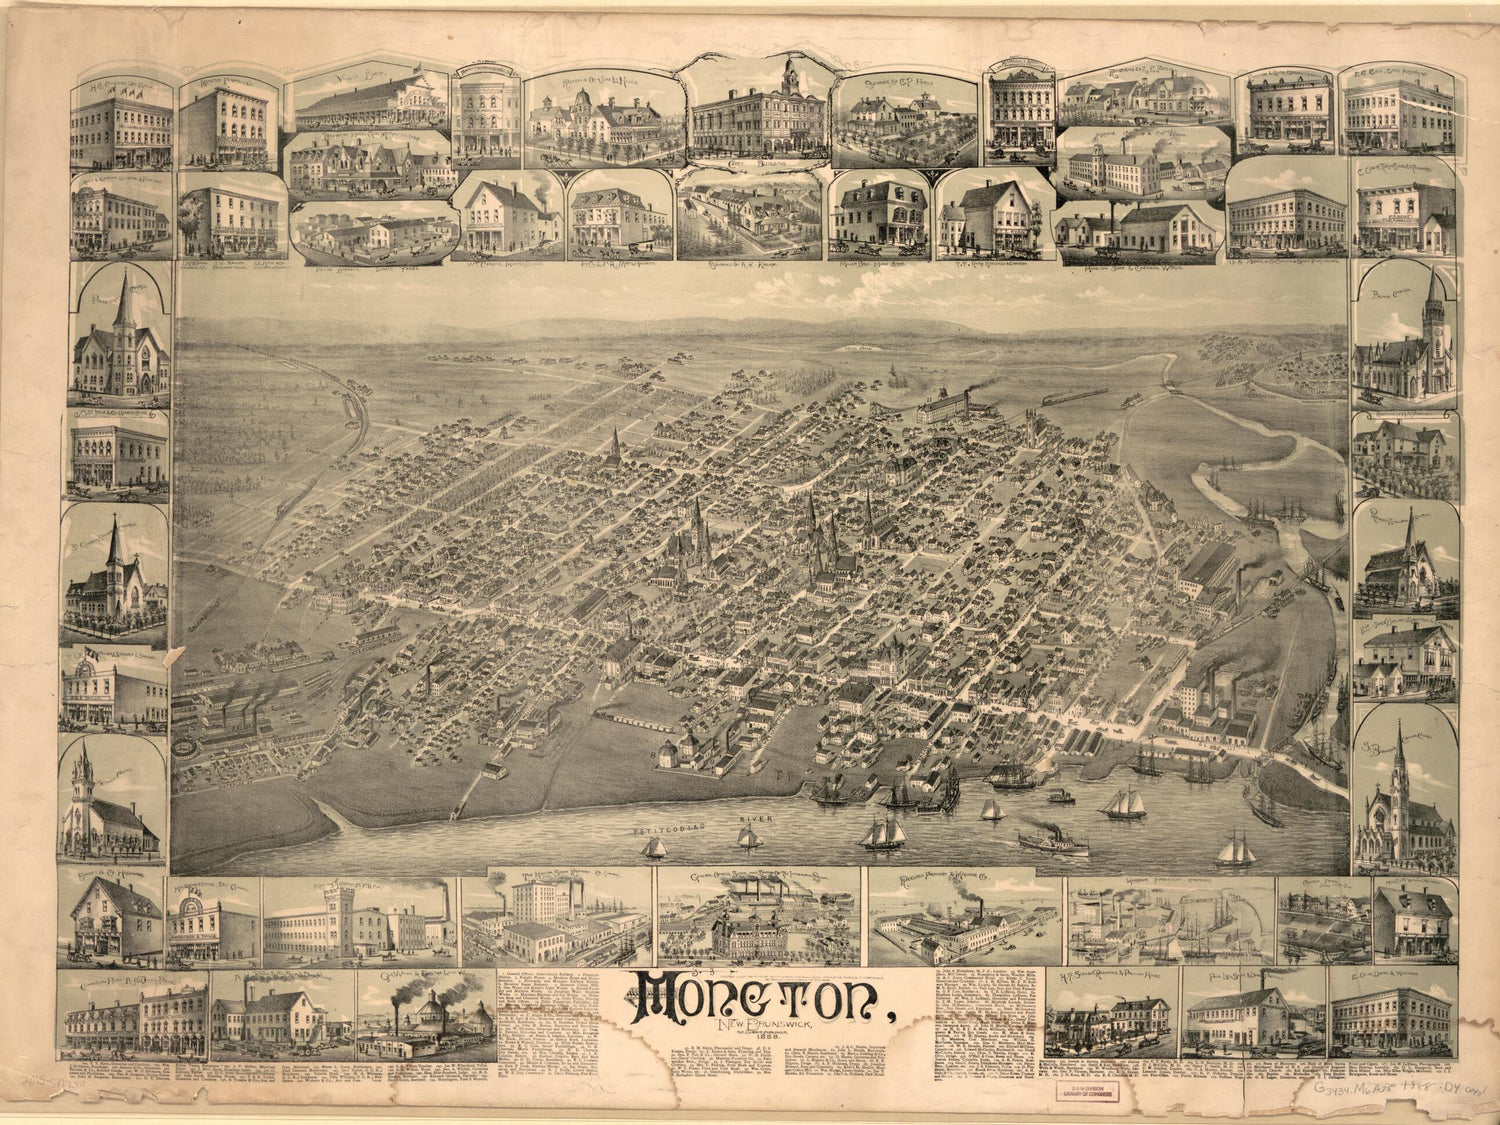 This old map of Moncton, New Brunswick, from 1888 was created by Duncan D. Currie in 1888